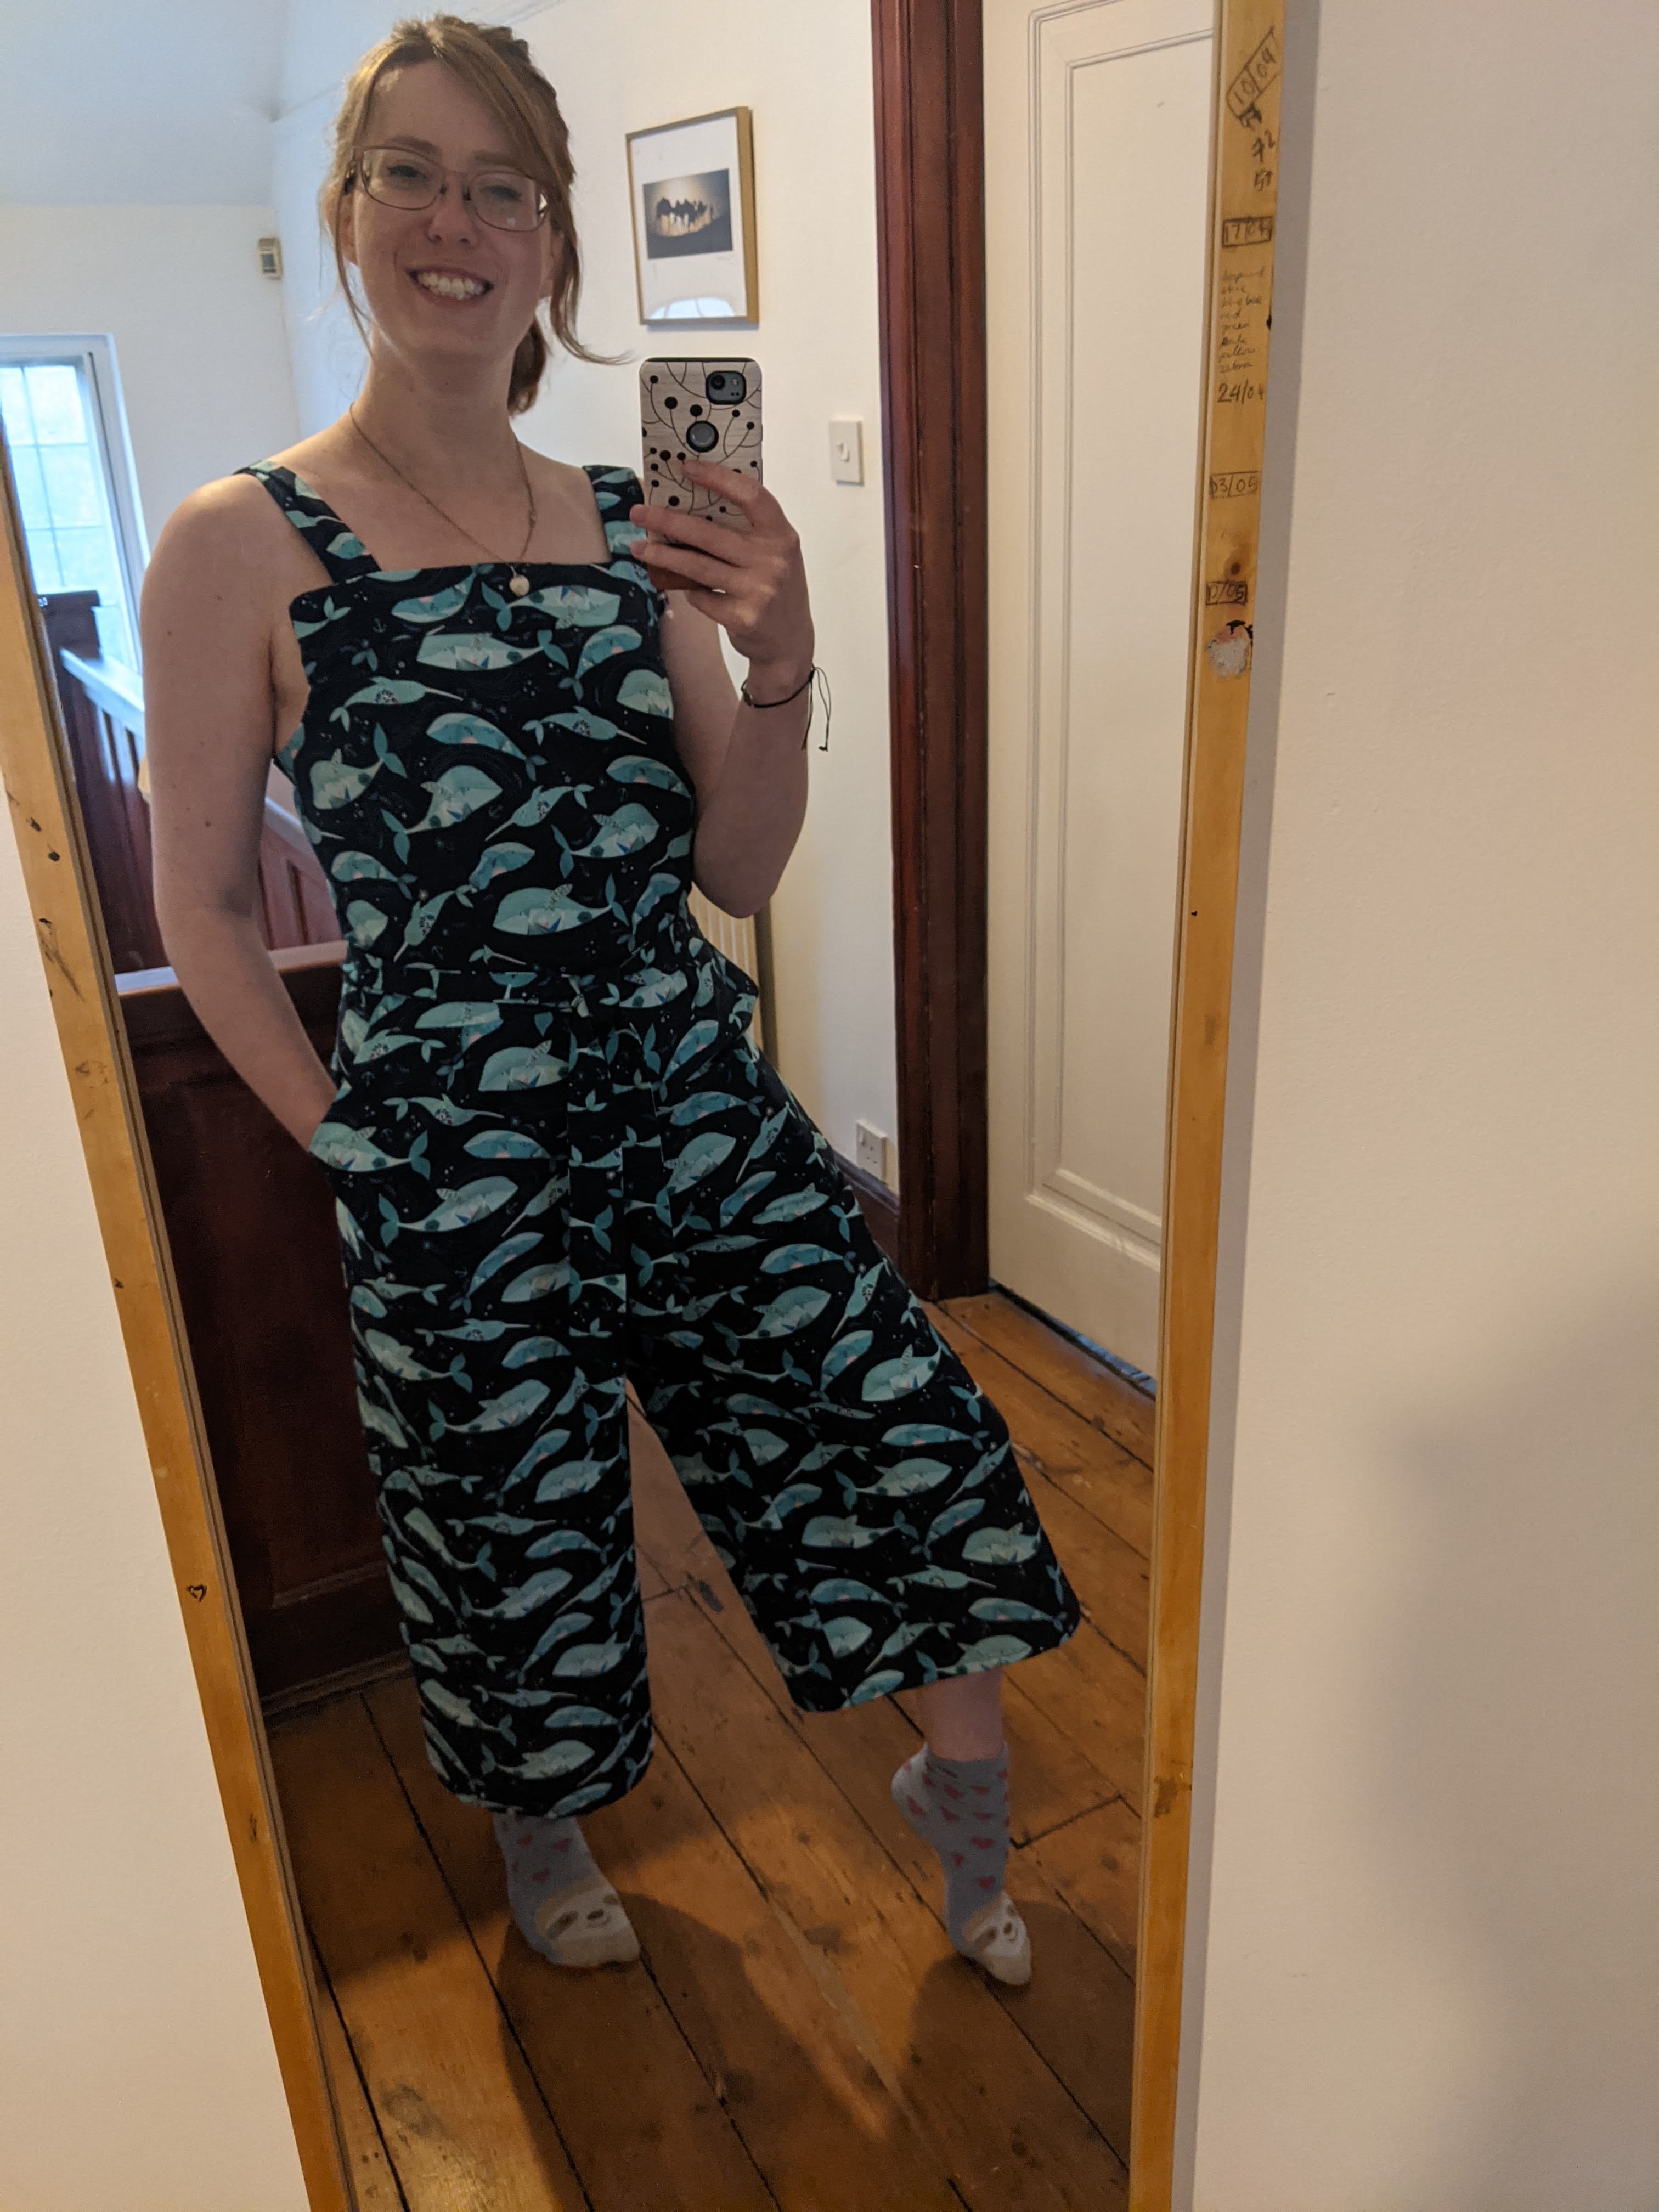 Beverley wearing the jumpsuit made out of the narwhal fabric. Trouser legs are mid-calf length and baggy, and it has a belt around the waist. Photo is a selfie taken in a mirror and Beverley is smiling